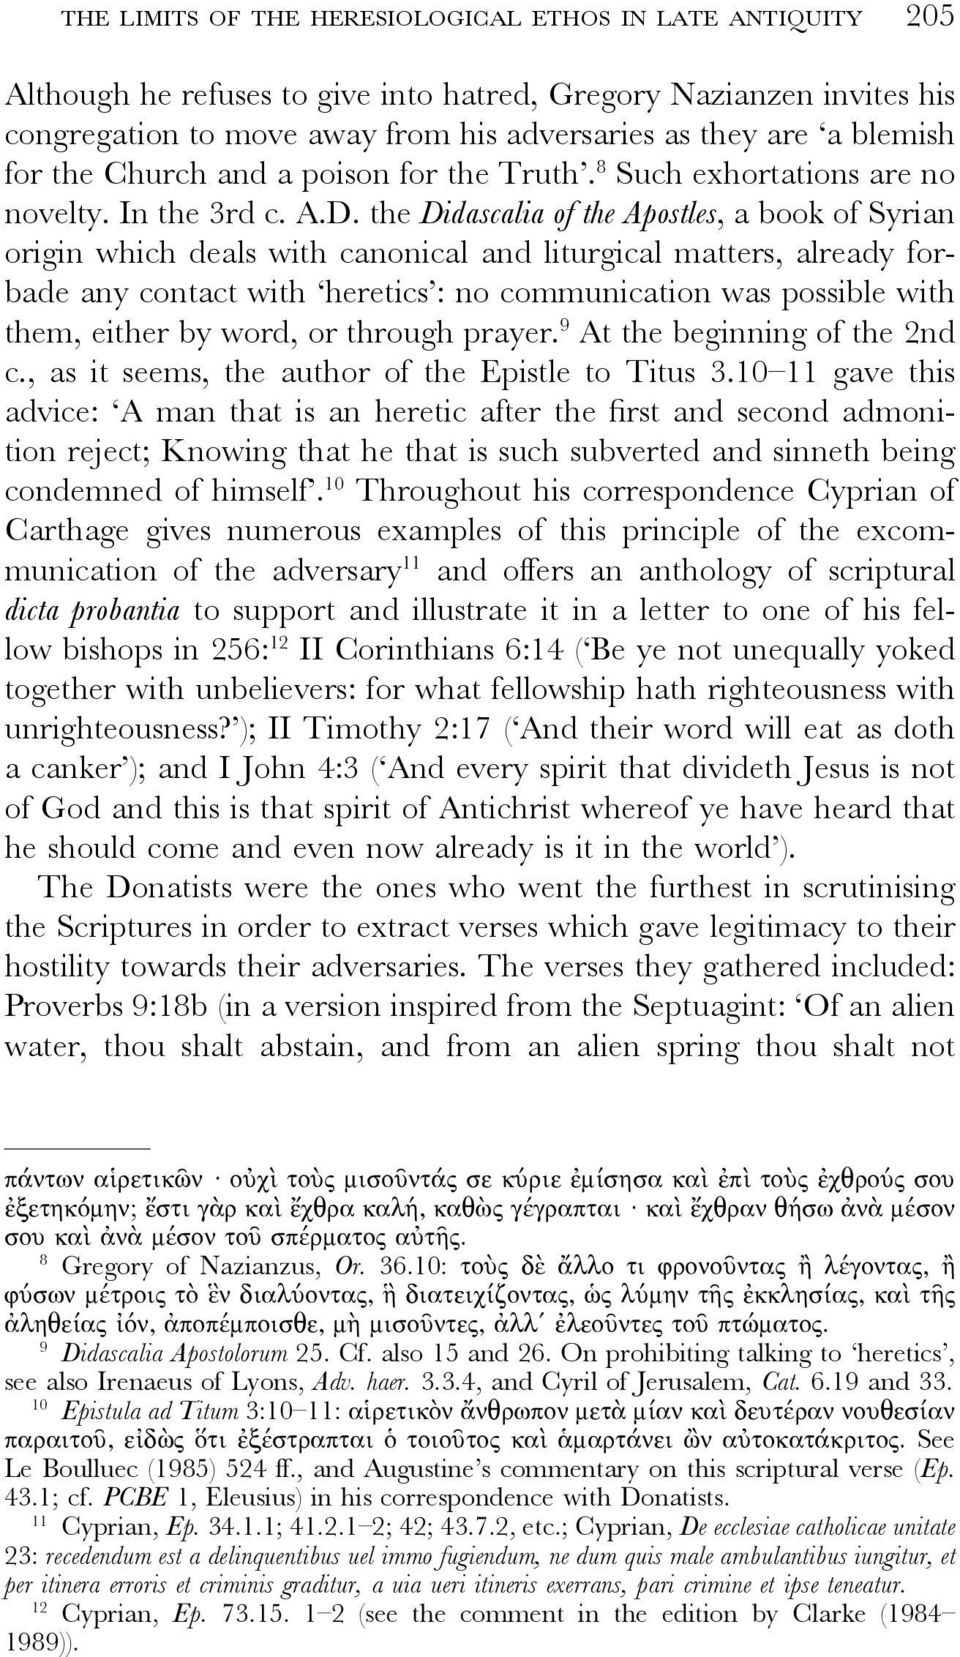 the Didascalia of the Apostles, a book of Syrian origin which deals with canonical and liturgical matters, already forbade any contact with heretics : no communication was possible with them, either